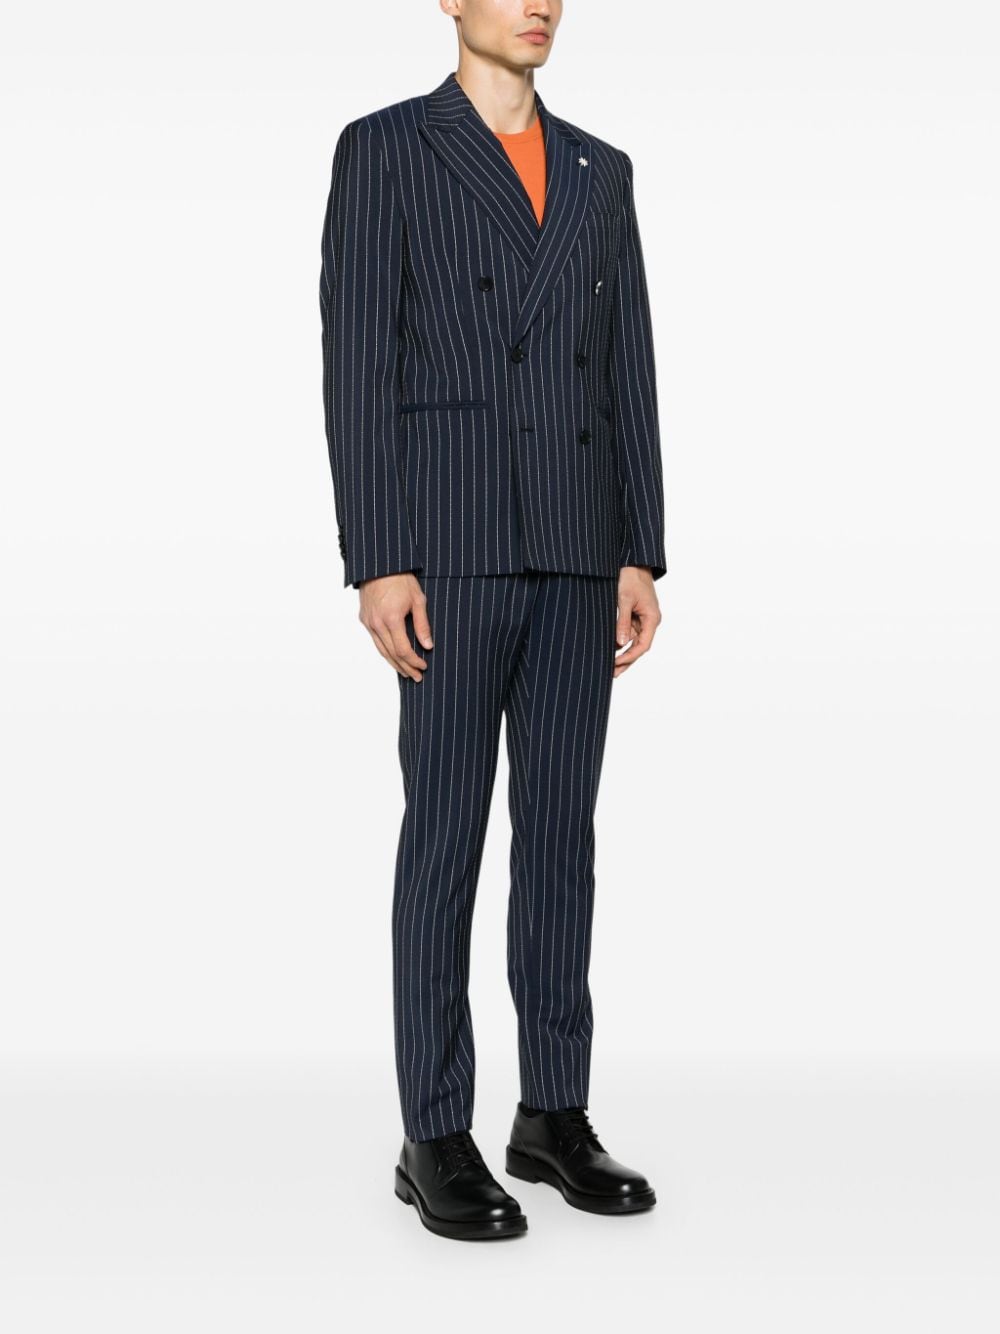 Double-breasted blue pinstripe suit